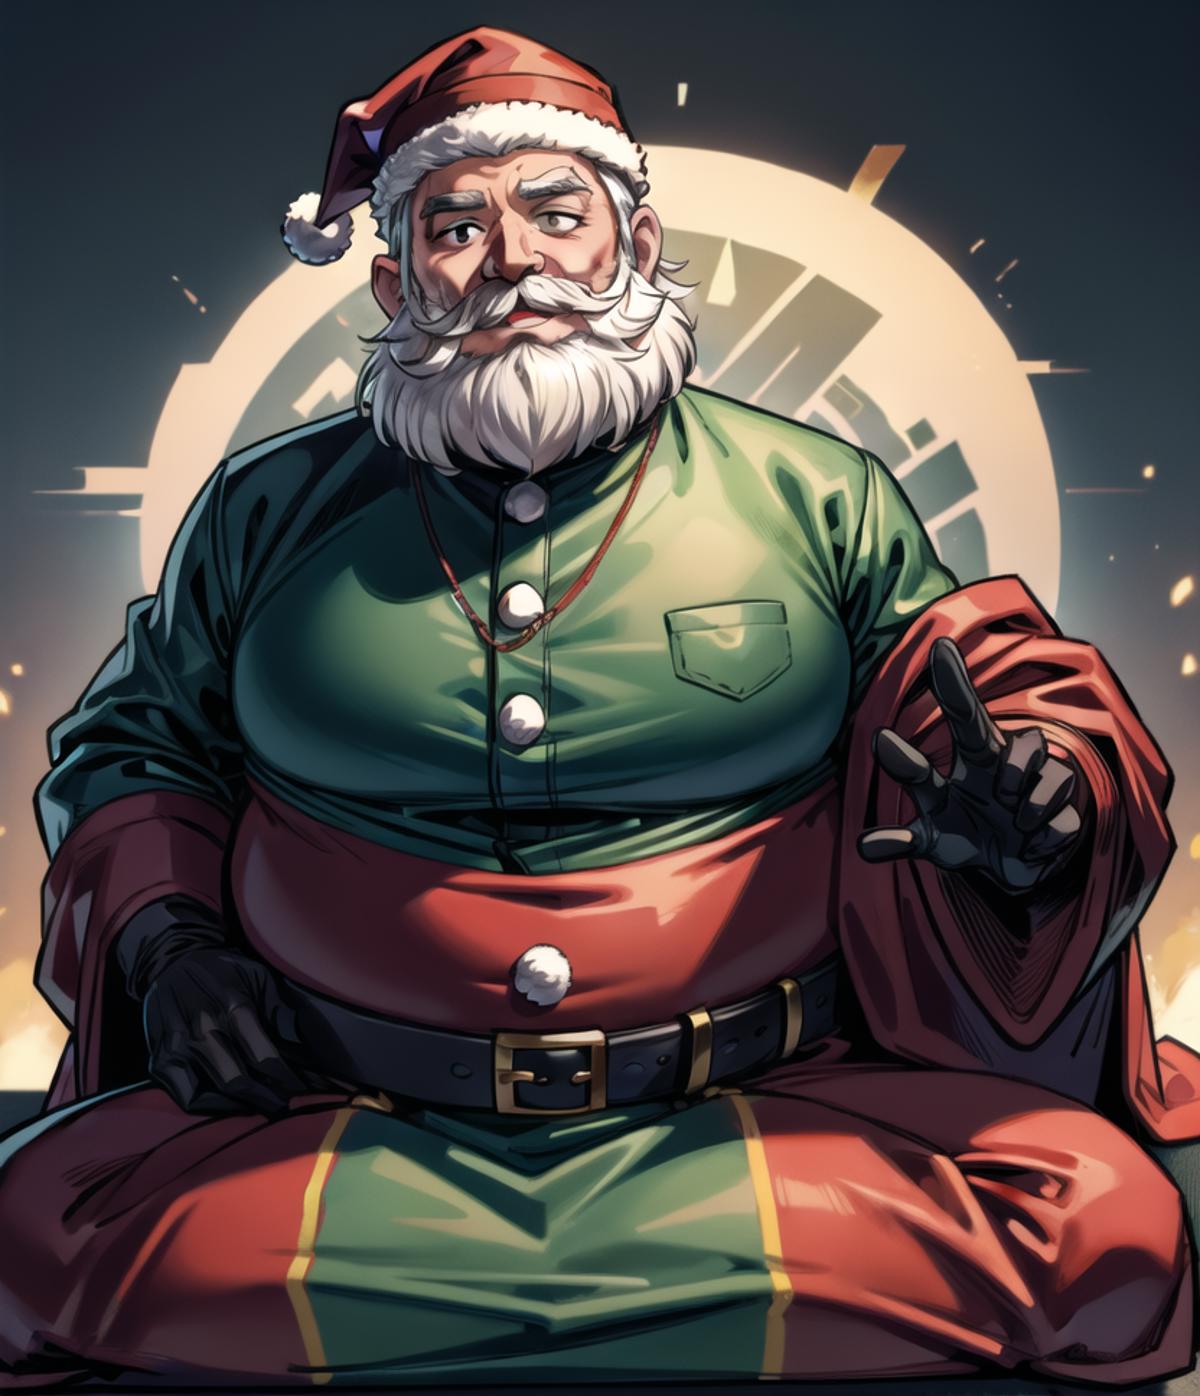 A Christmas-themed comic featuring Santa Claus in a green and red outfit sitting on a chair.